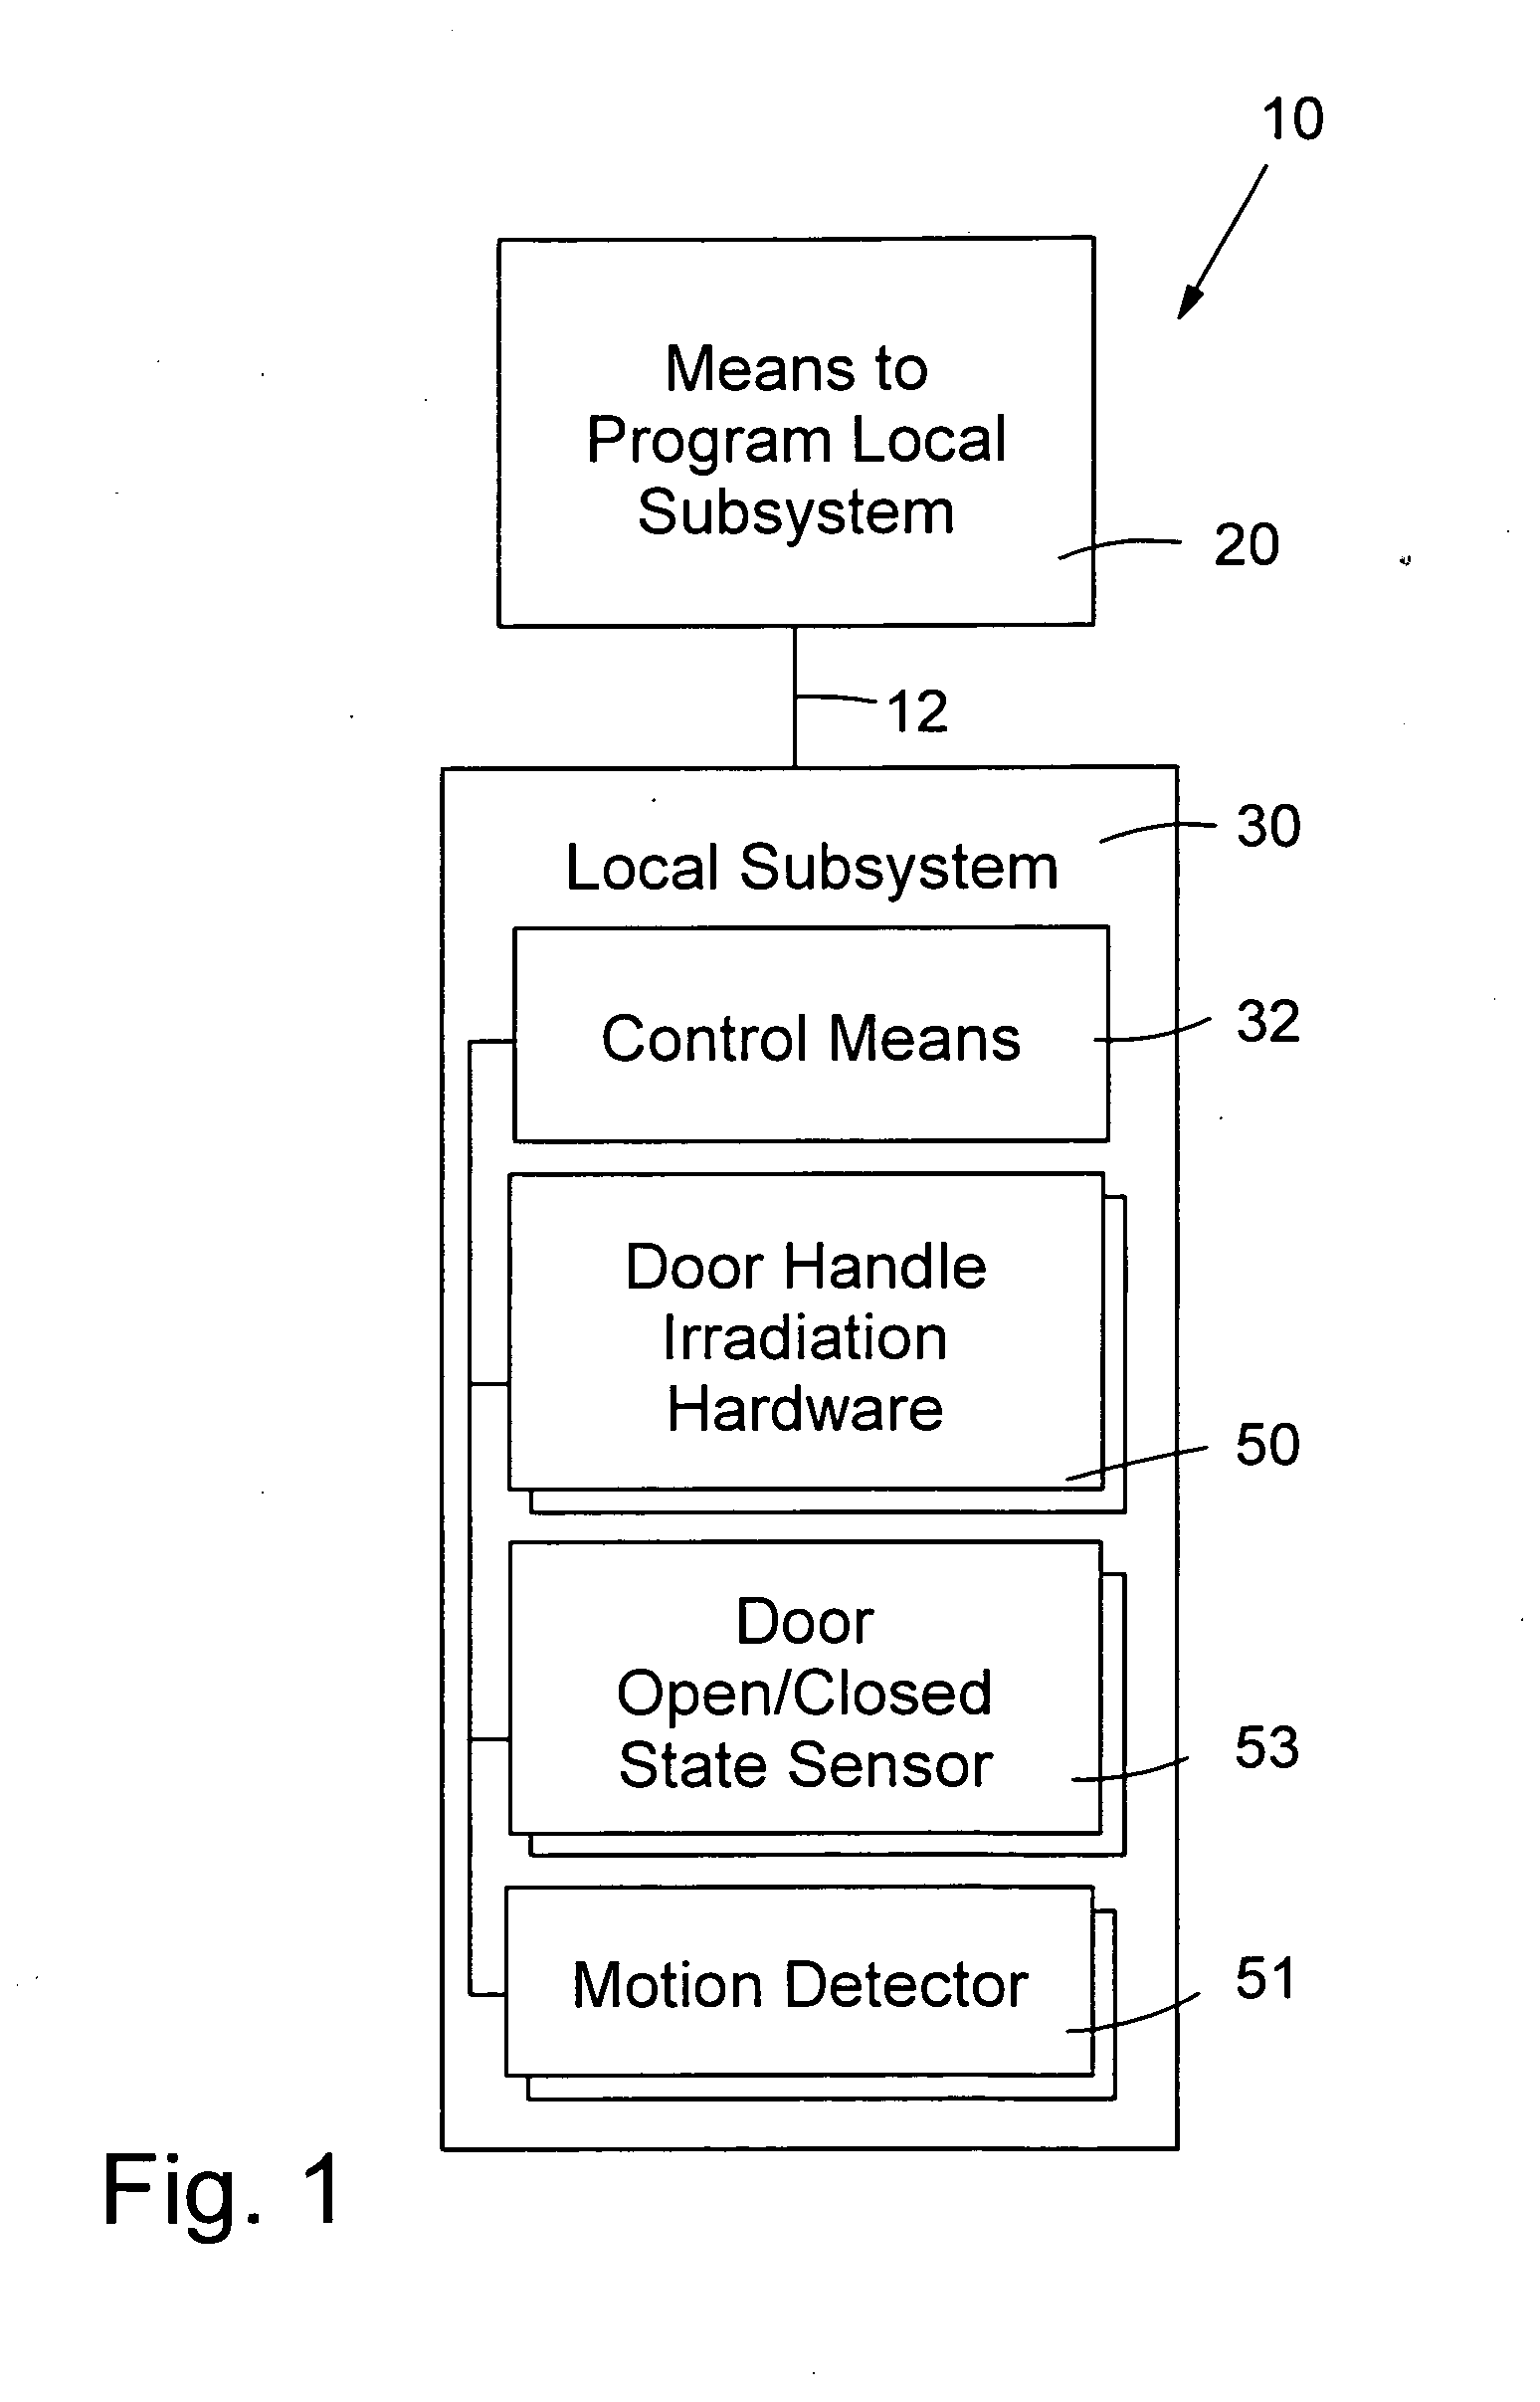 Irradiation system for door handle